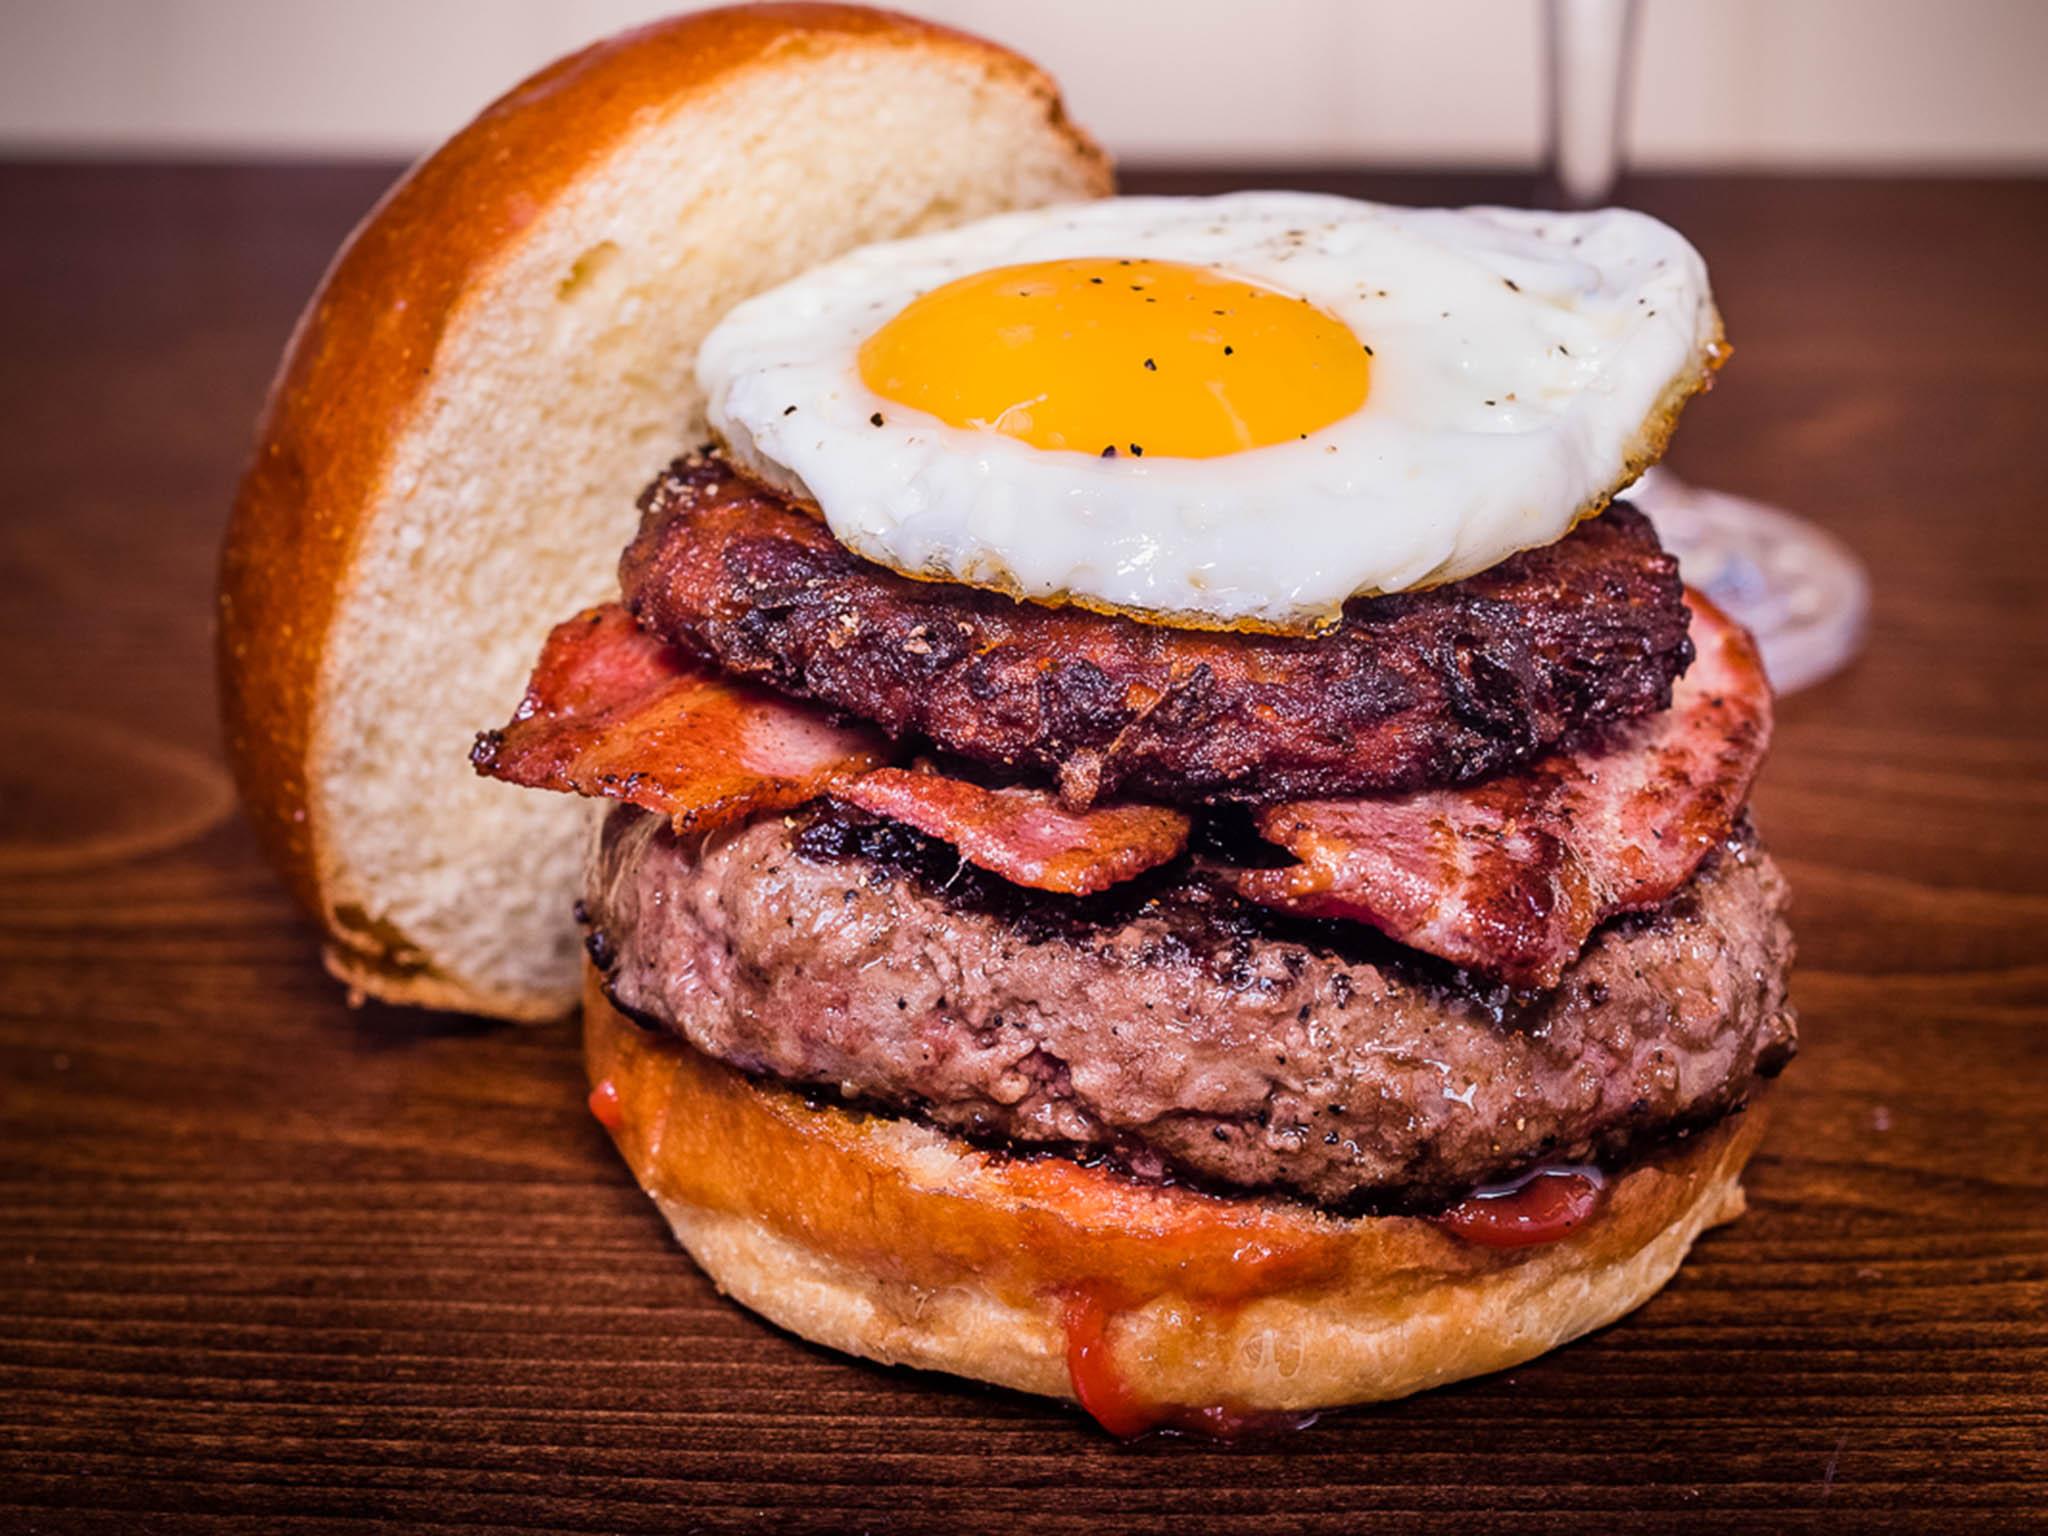 The breakfast burger delivers?a hearty brunch option